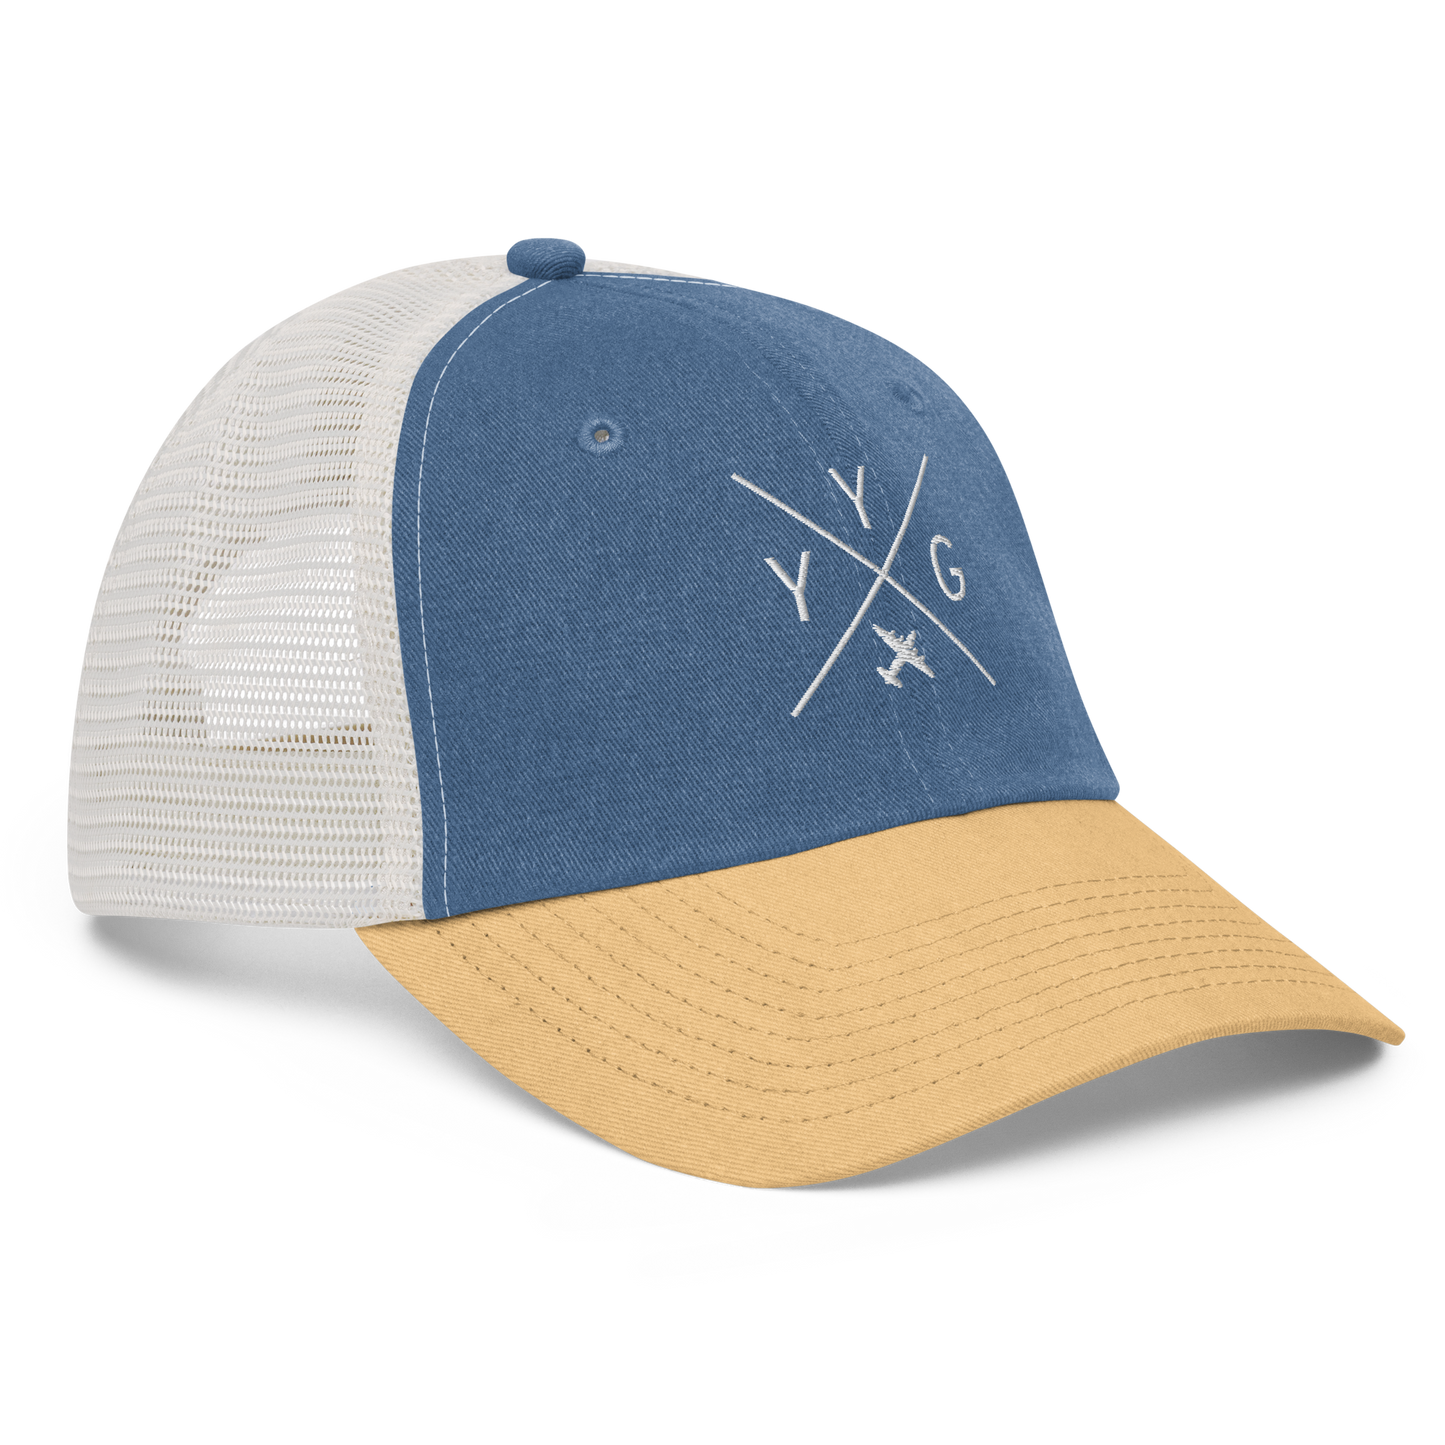 YHM Designs - YYG Charlottetown Pigment-Dyed Trucker Cap - Crossed-X Design with Airport Code and Vintage Propliner - White Embroidery - Image 18